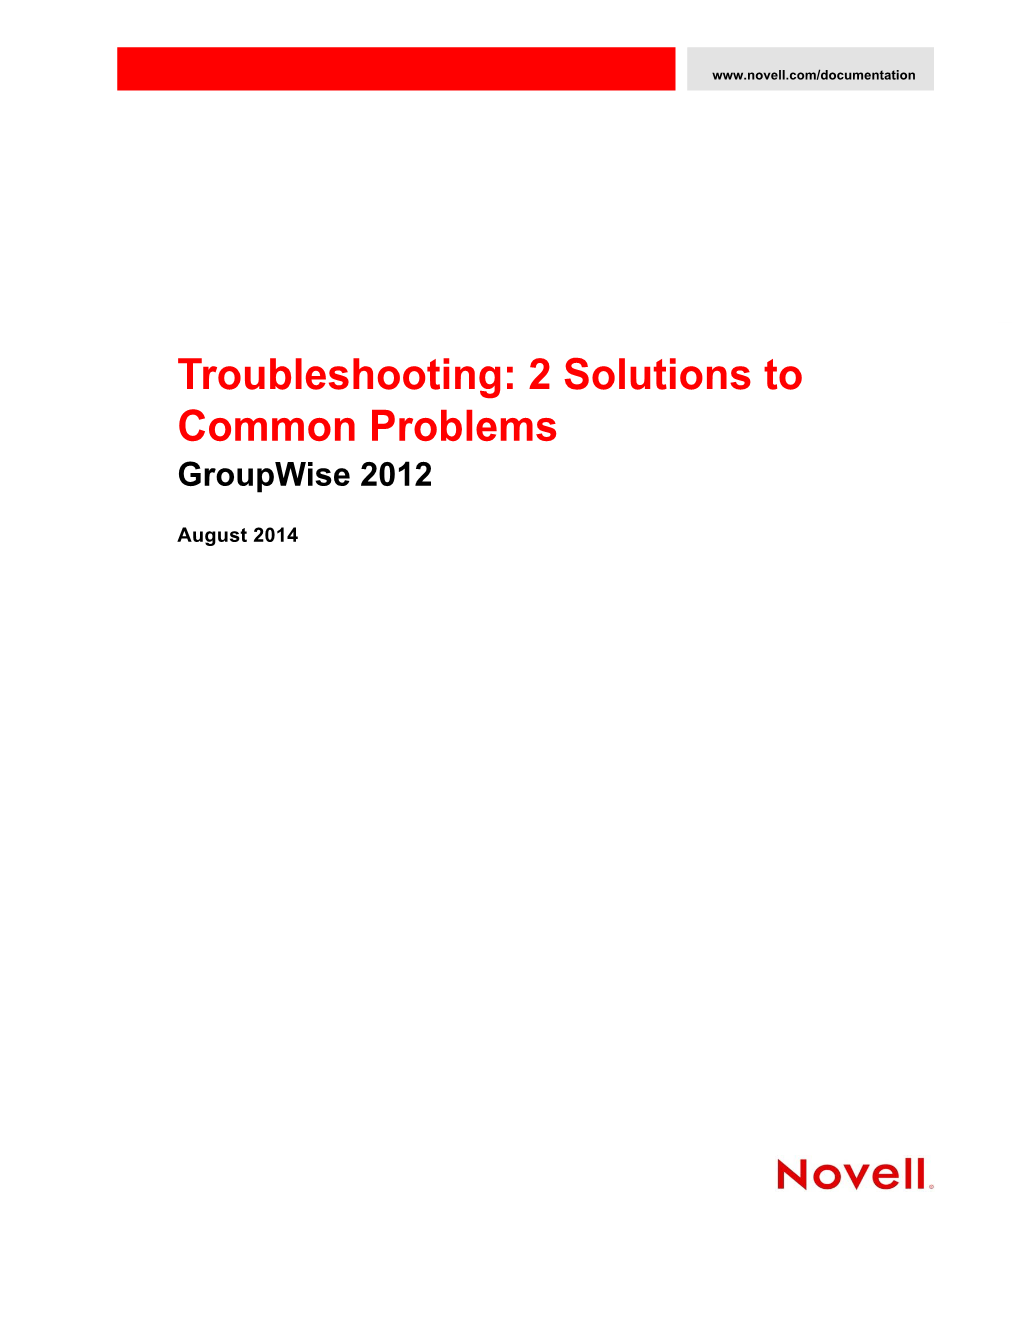 Groupwise 2012 Troubleshooting 2: Solutions to Common Problems About This Guide